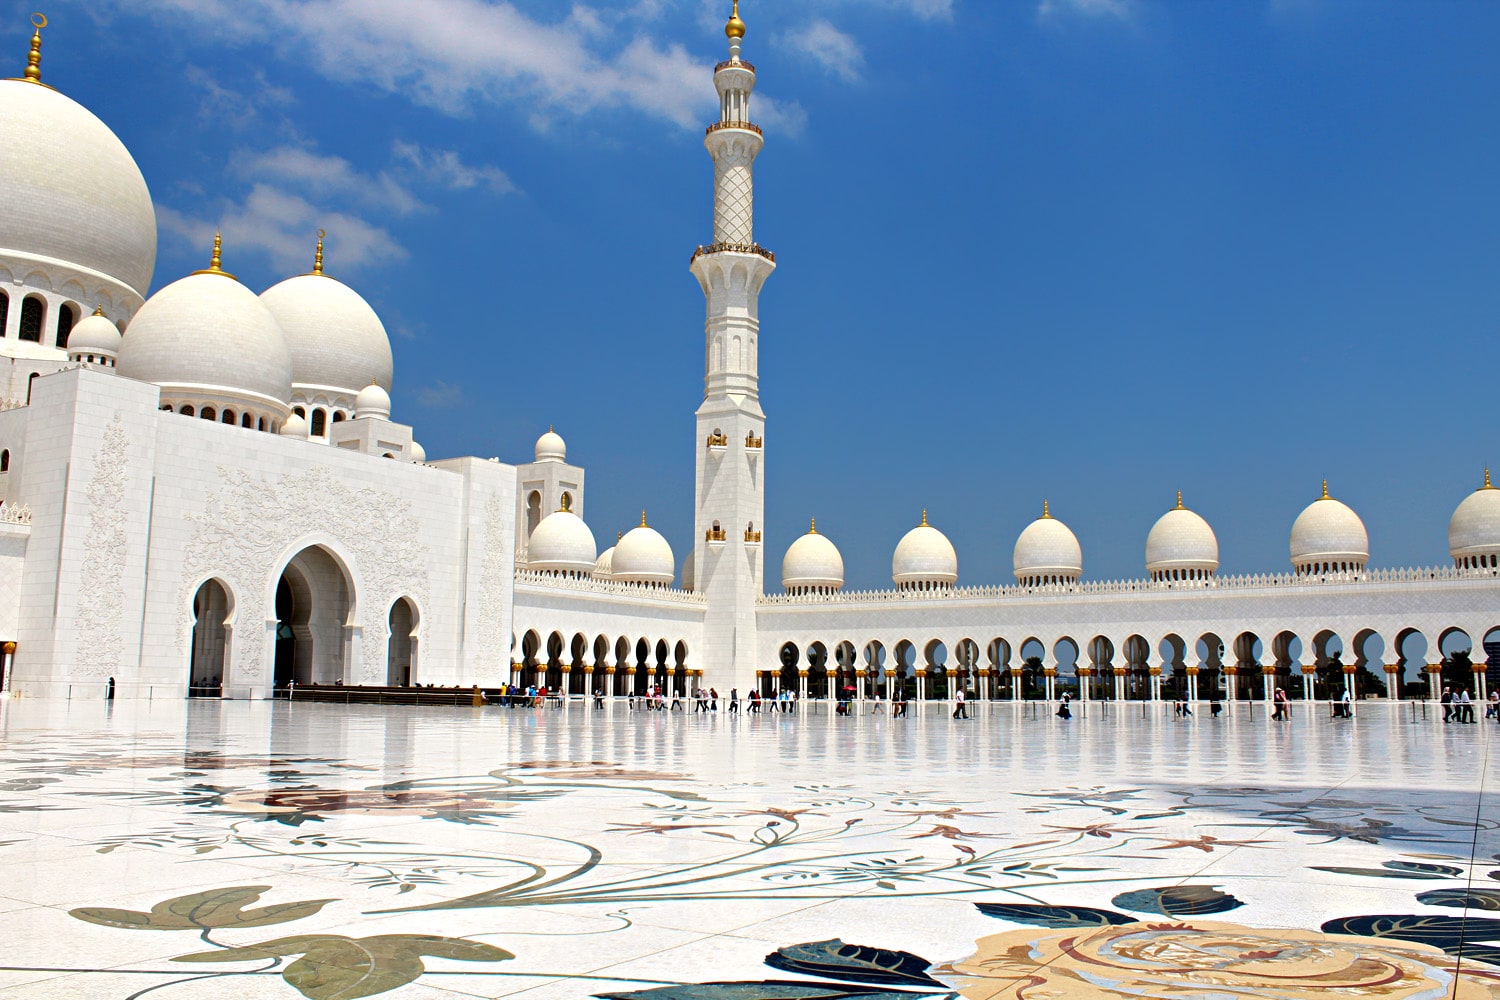 The Sheikh Zayed Mosque in Abu Dhabi